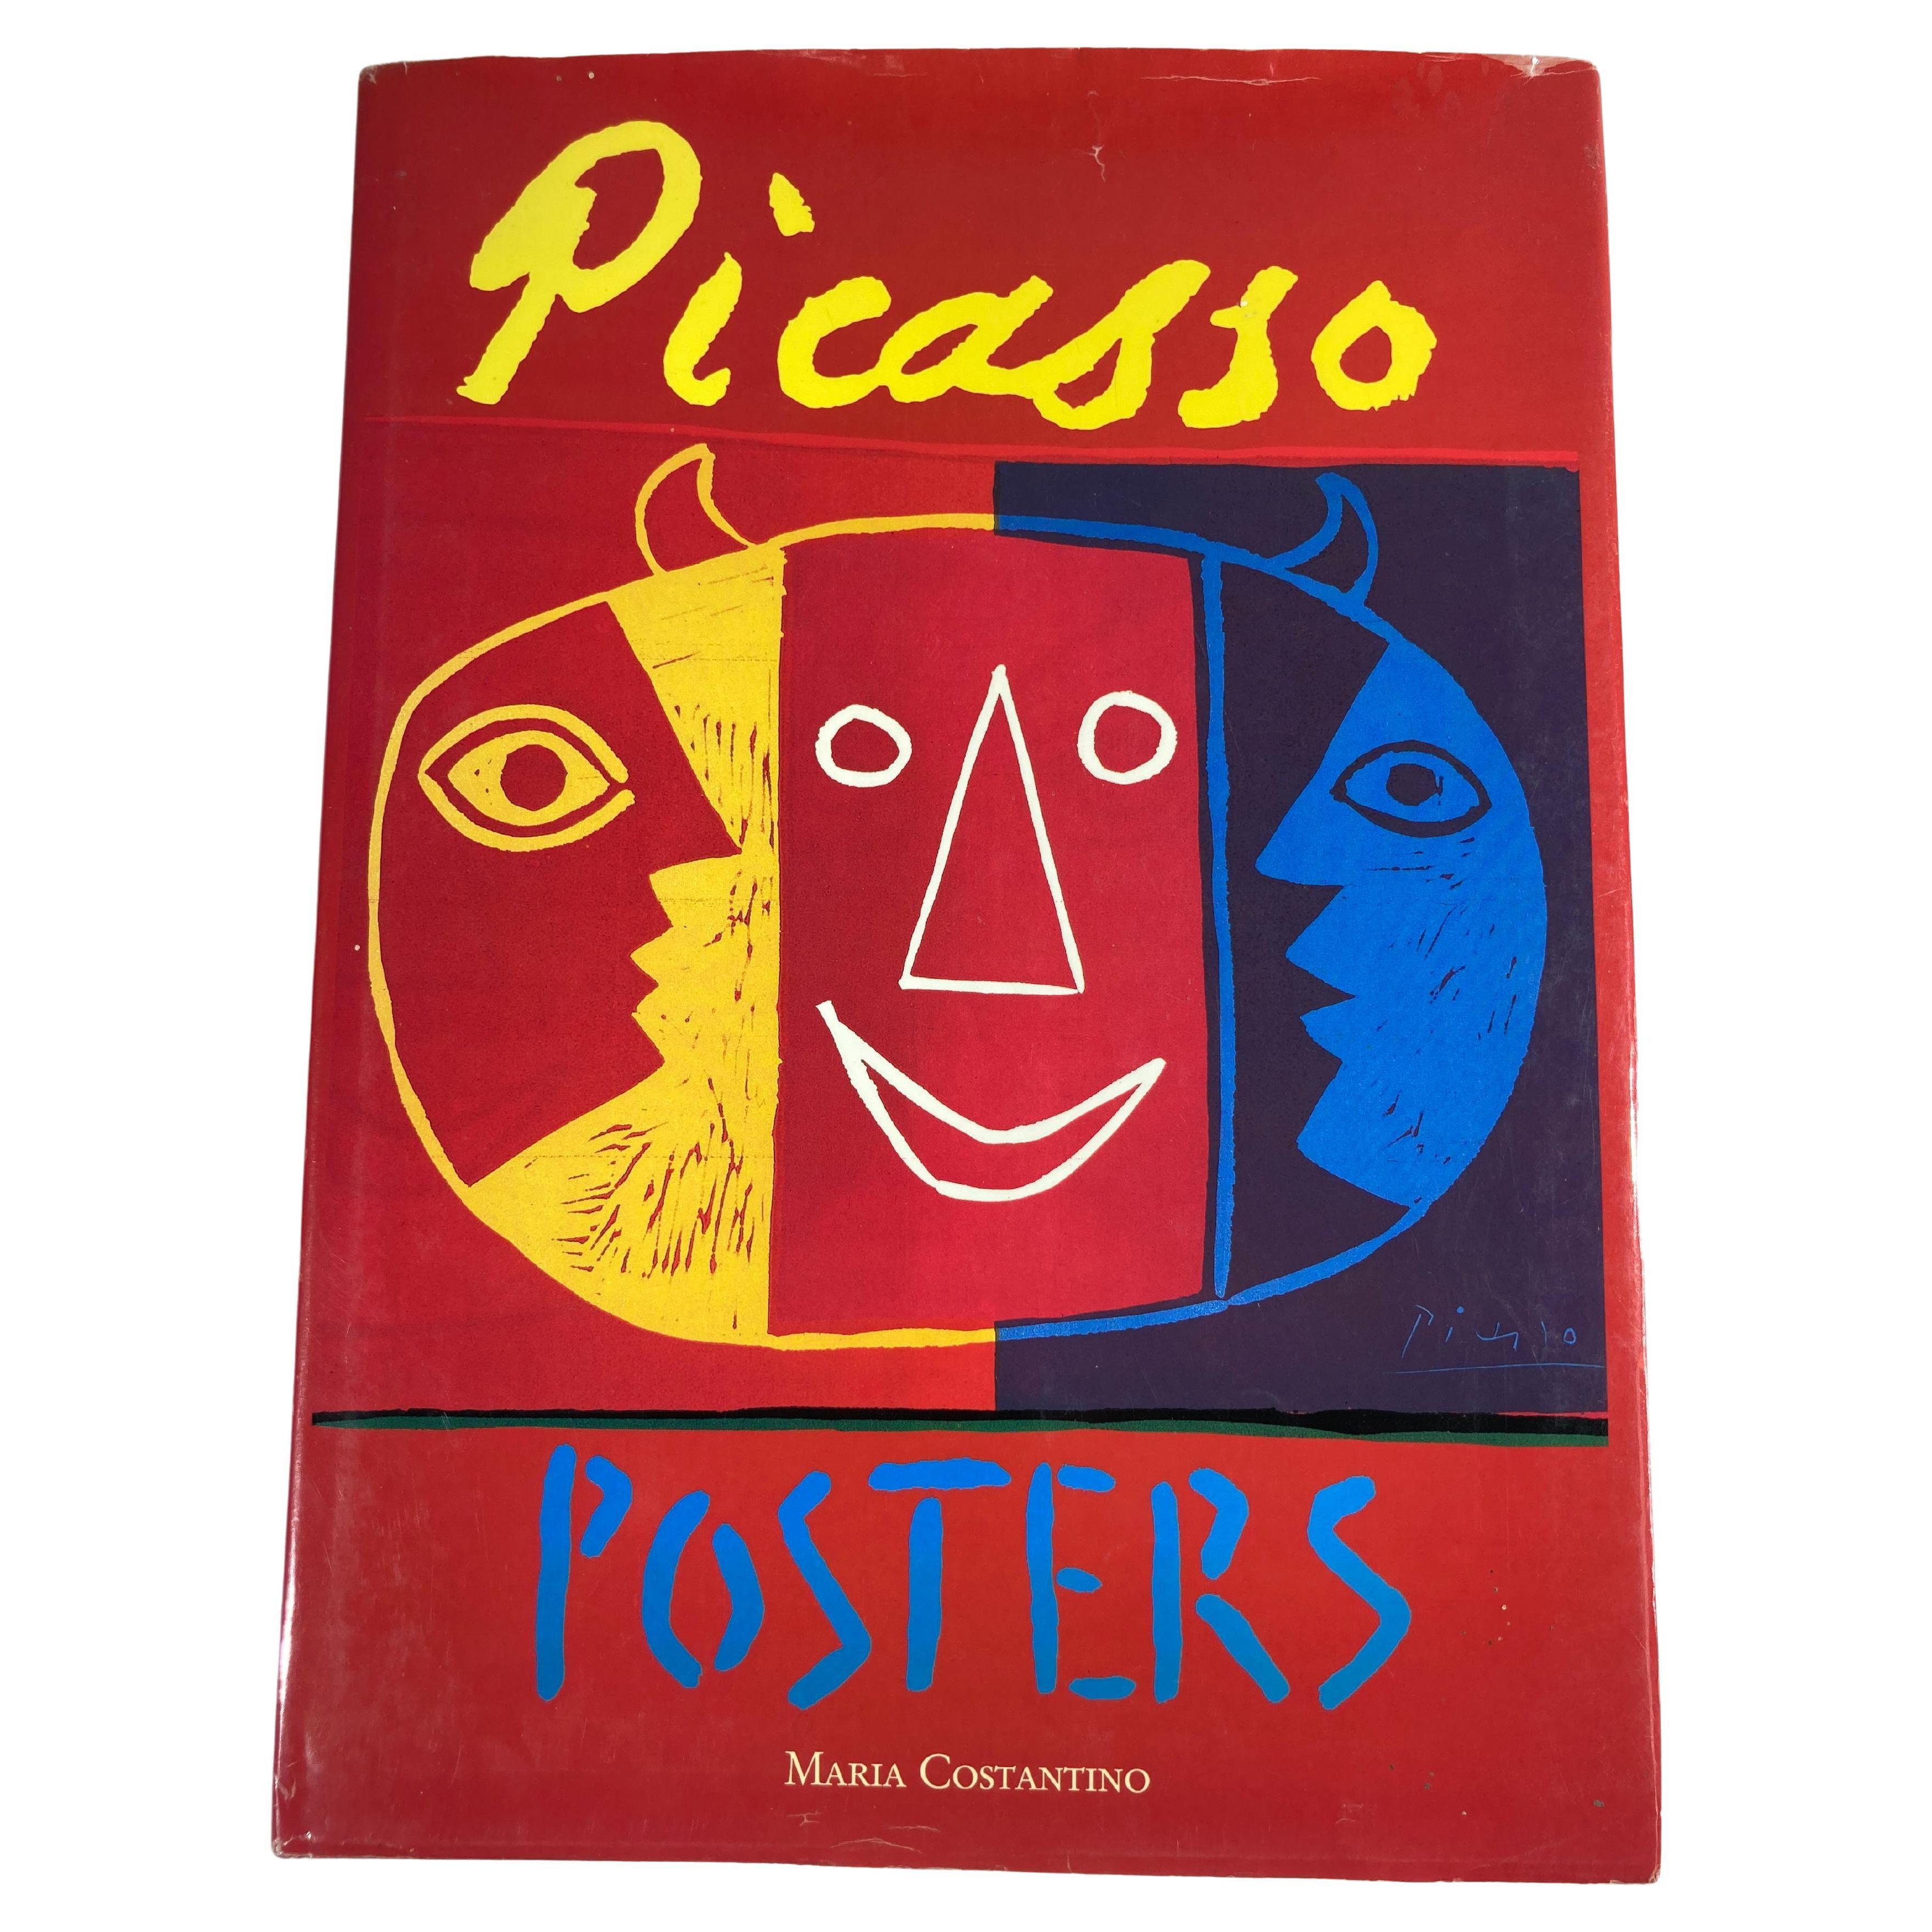 'Picasso Posters' Cubism Red Pablo Picasso Large Hardcover Art Book